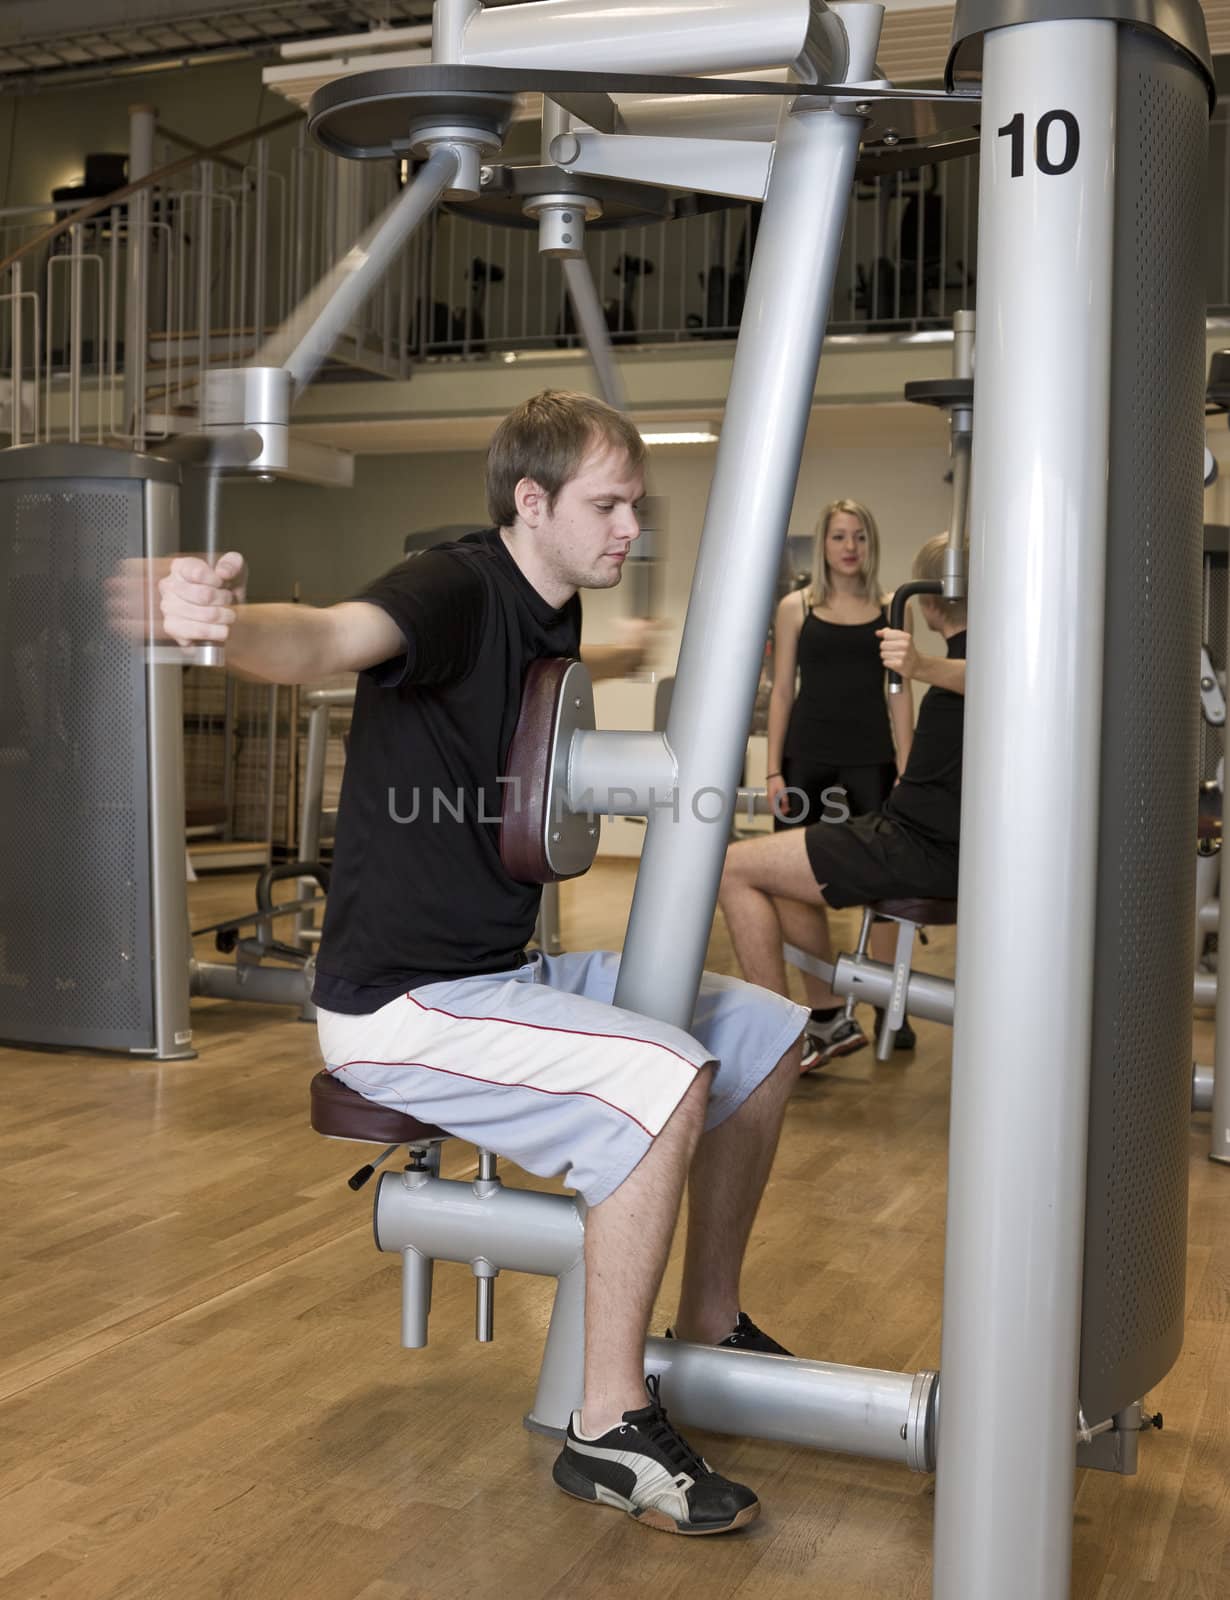 Young man using an exercise machine by gemenacom